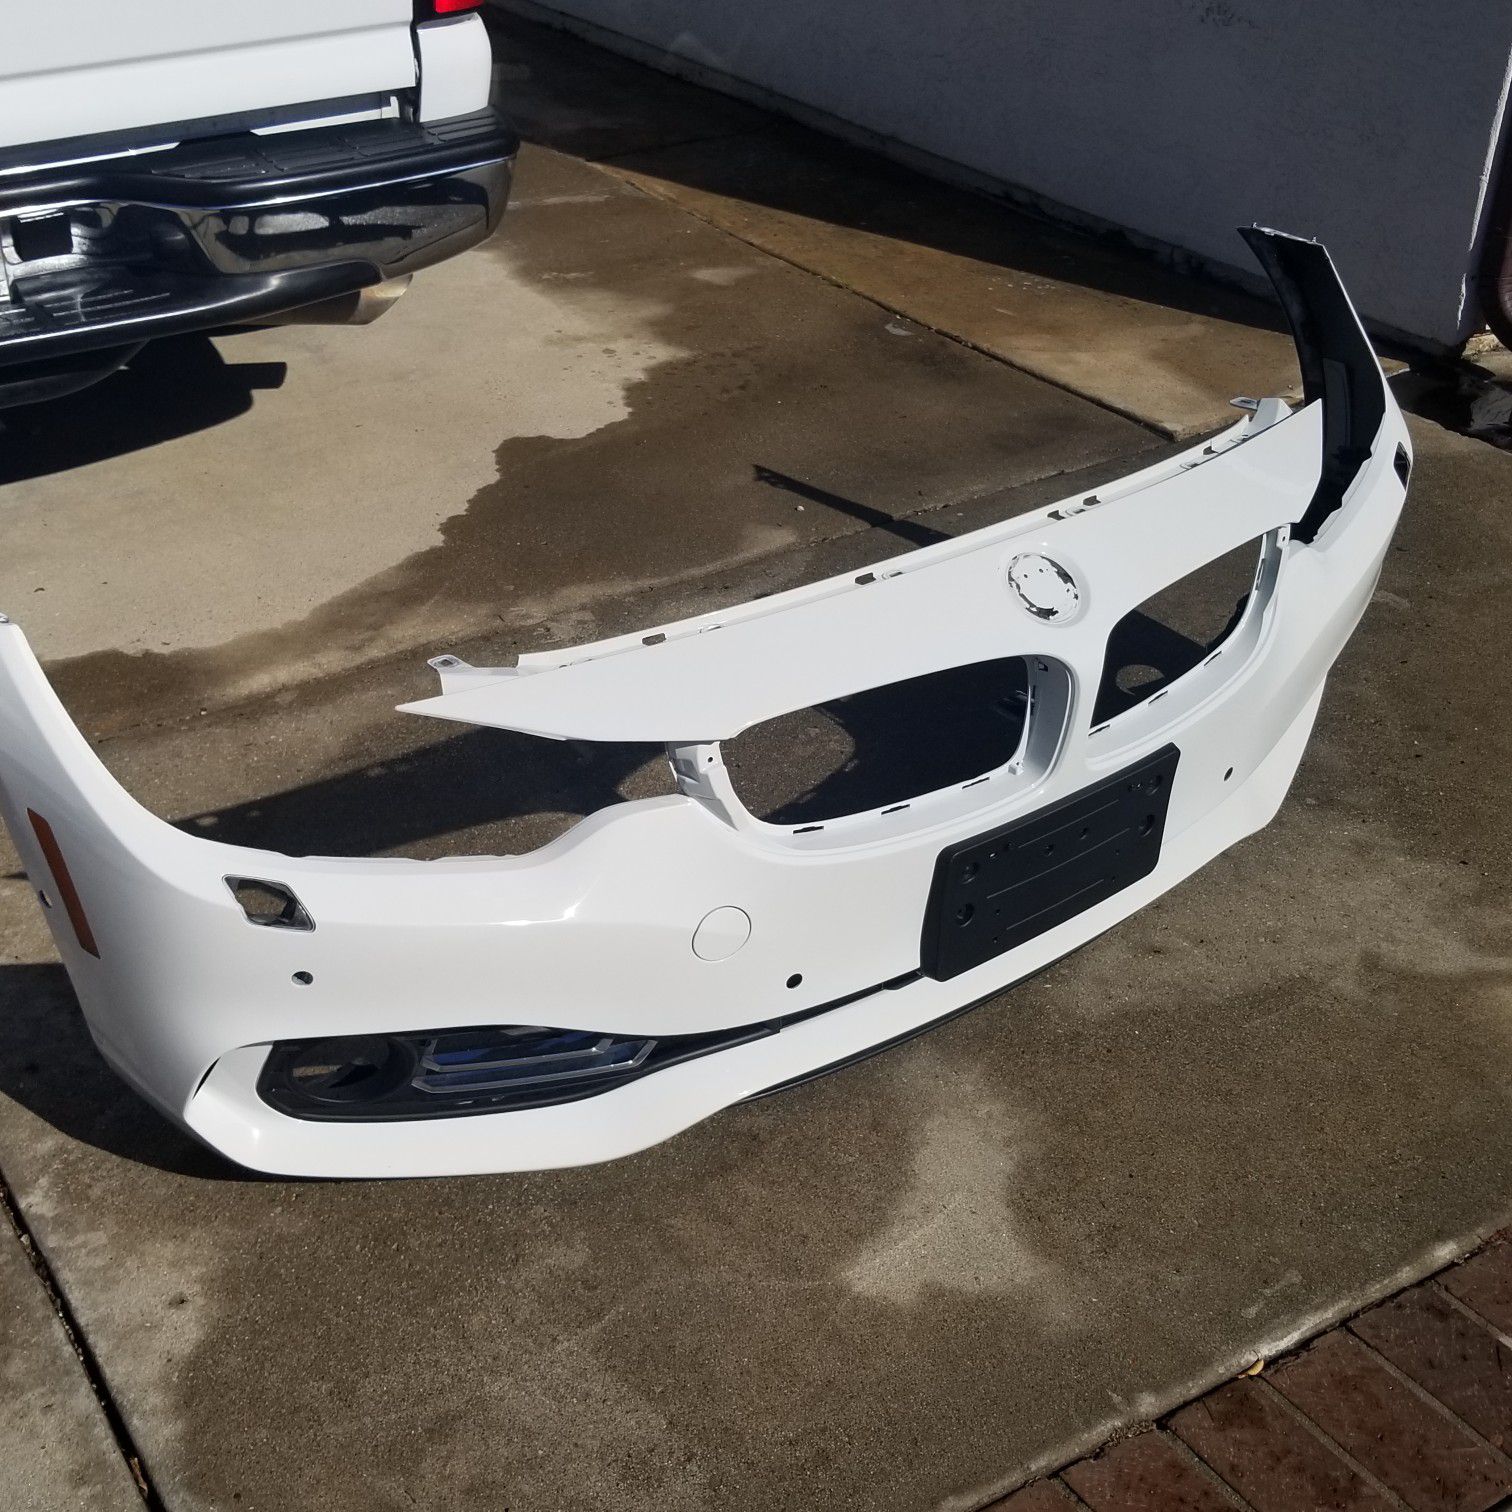 BMW 4 series front bumper and side skirts for sale!!